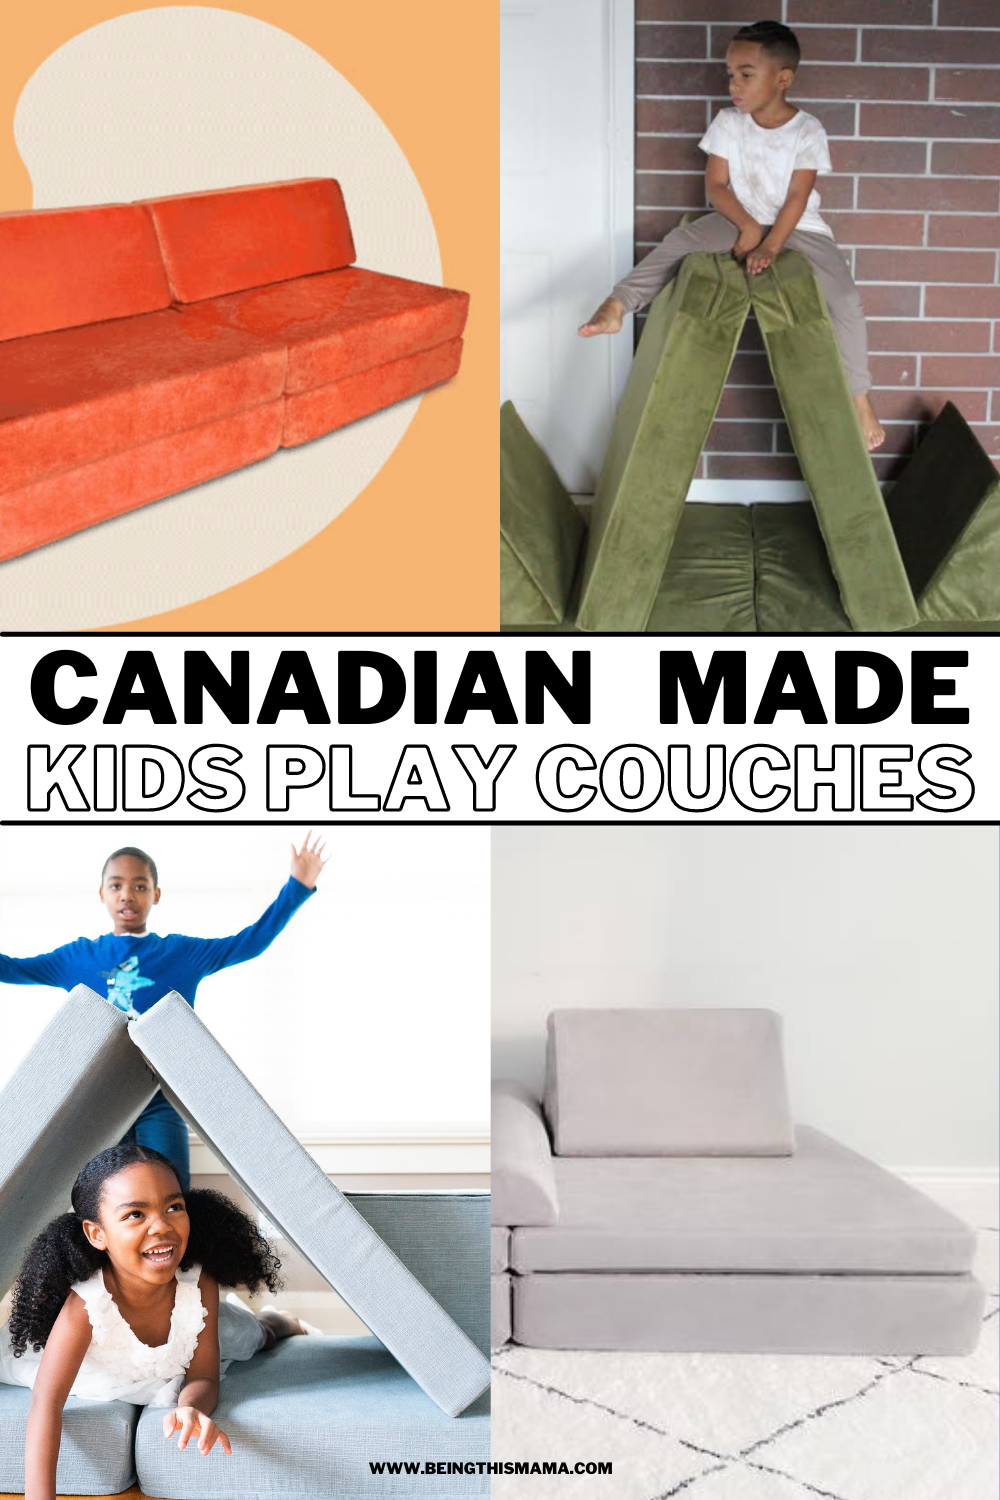 Six Canadian Kids Play Couches Companies